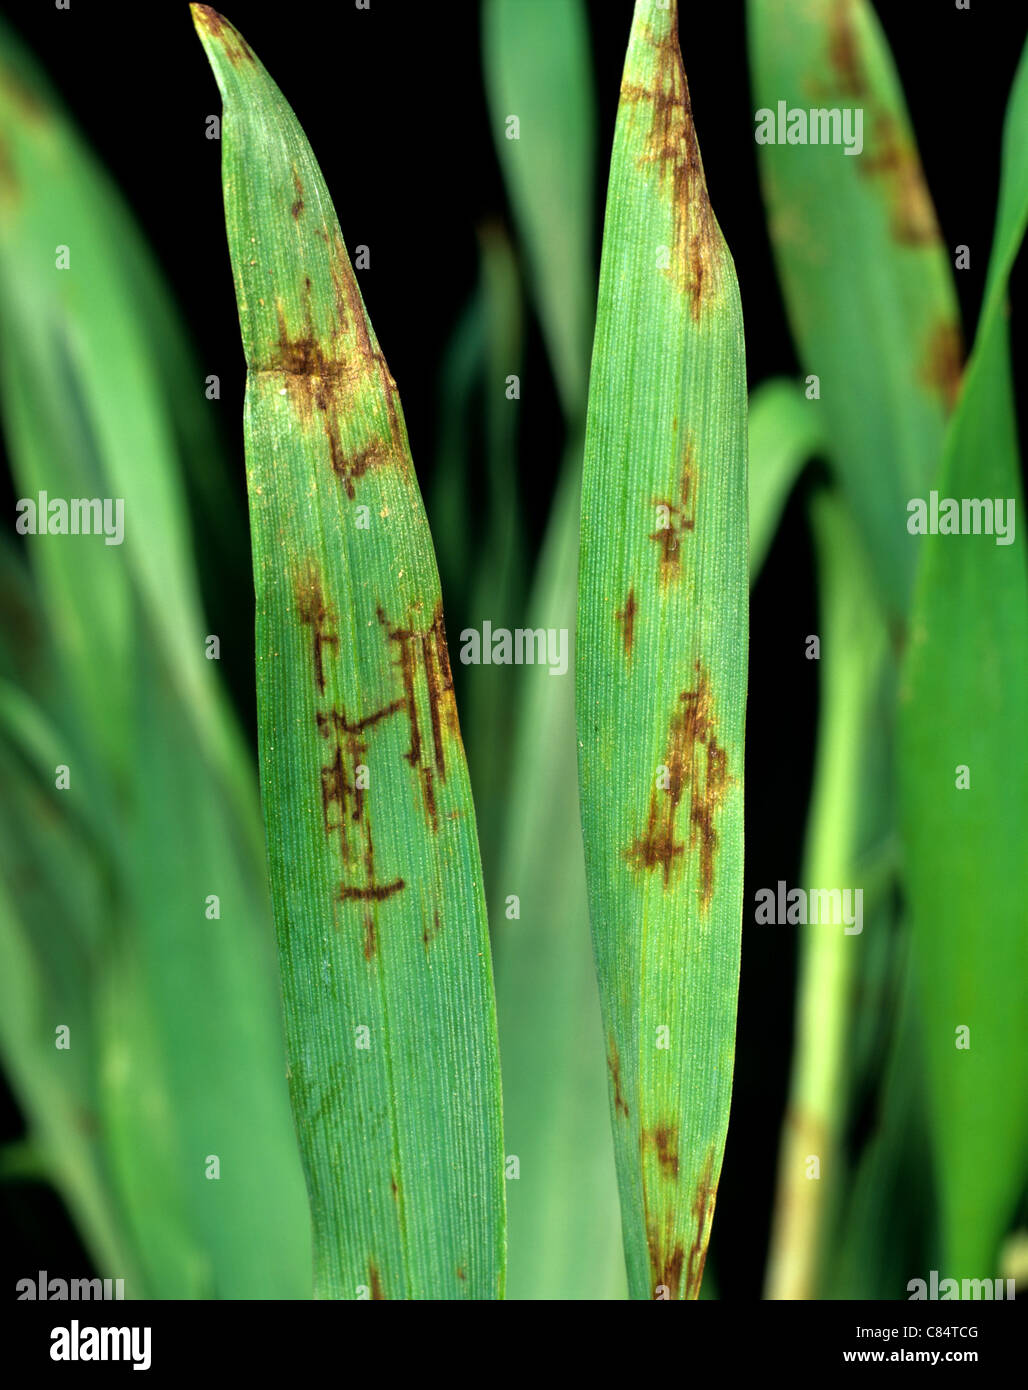 Net blotch (Pyrenophora teres) lesions on seedling barley leaves Stock Photo